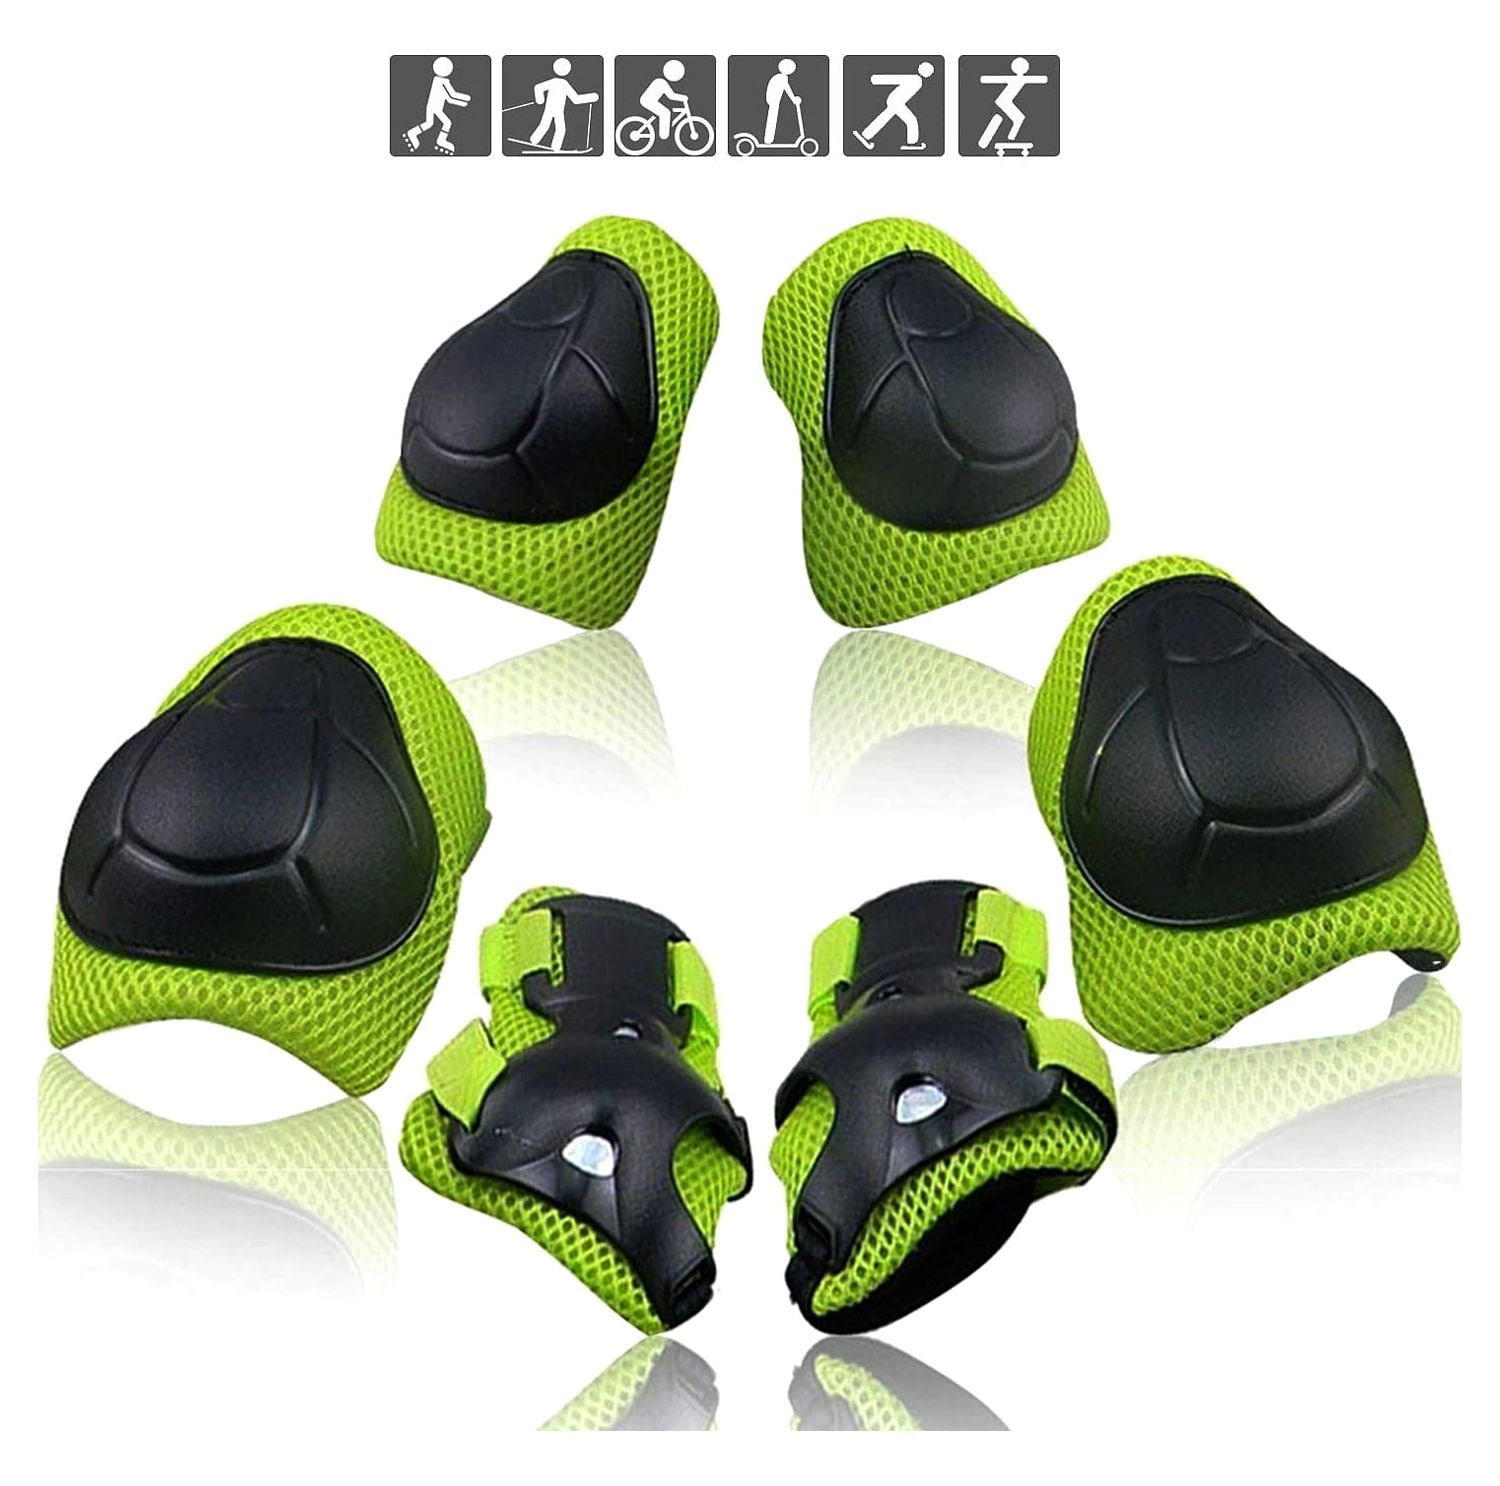 Knee Pads for Kids,Kids Protective Gear Set with Child Kids Knee and ...